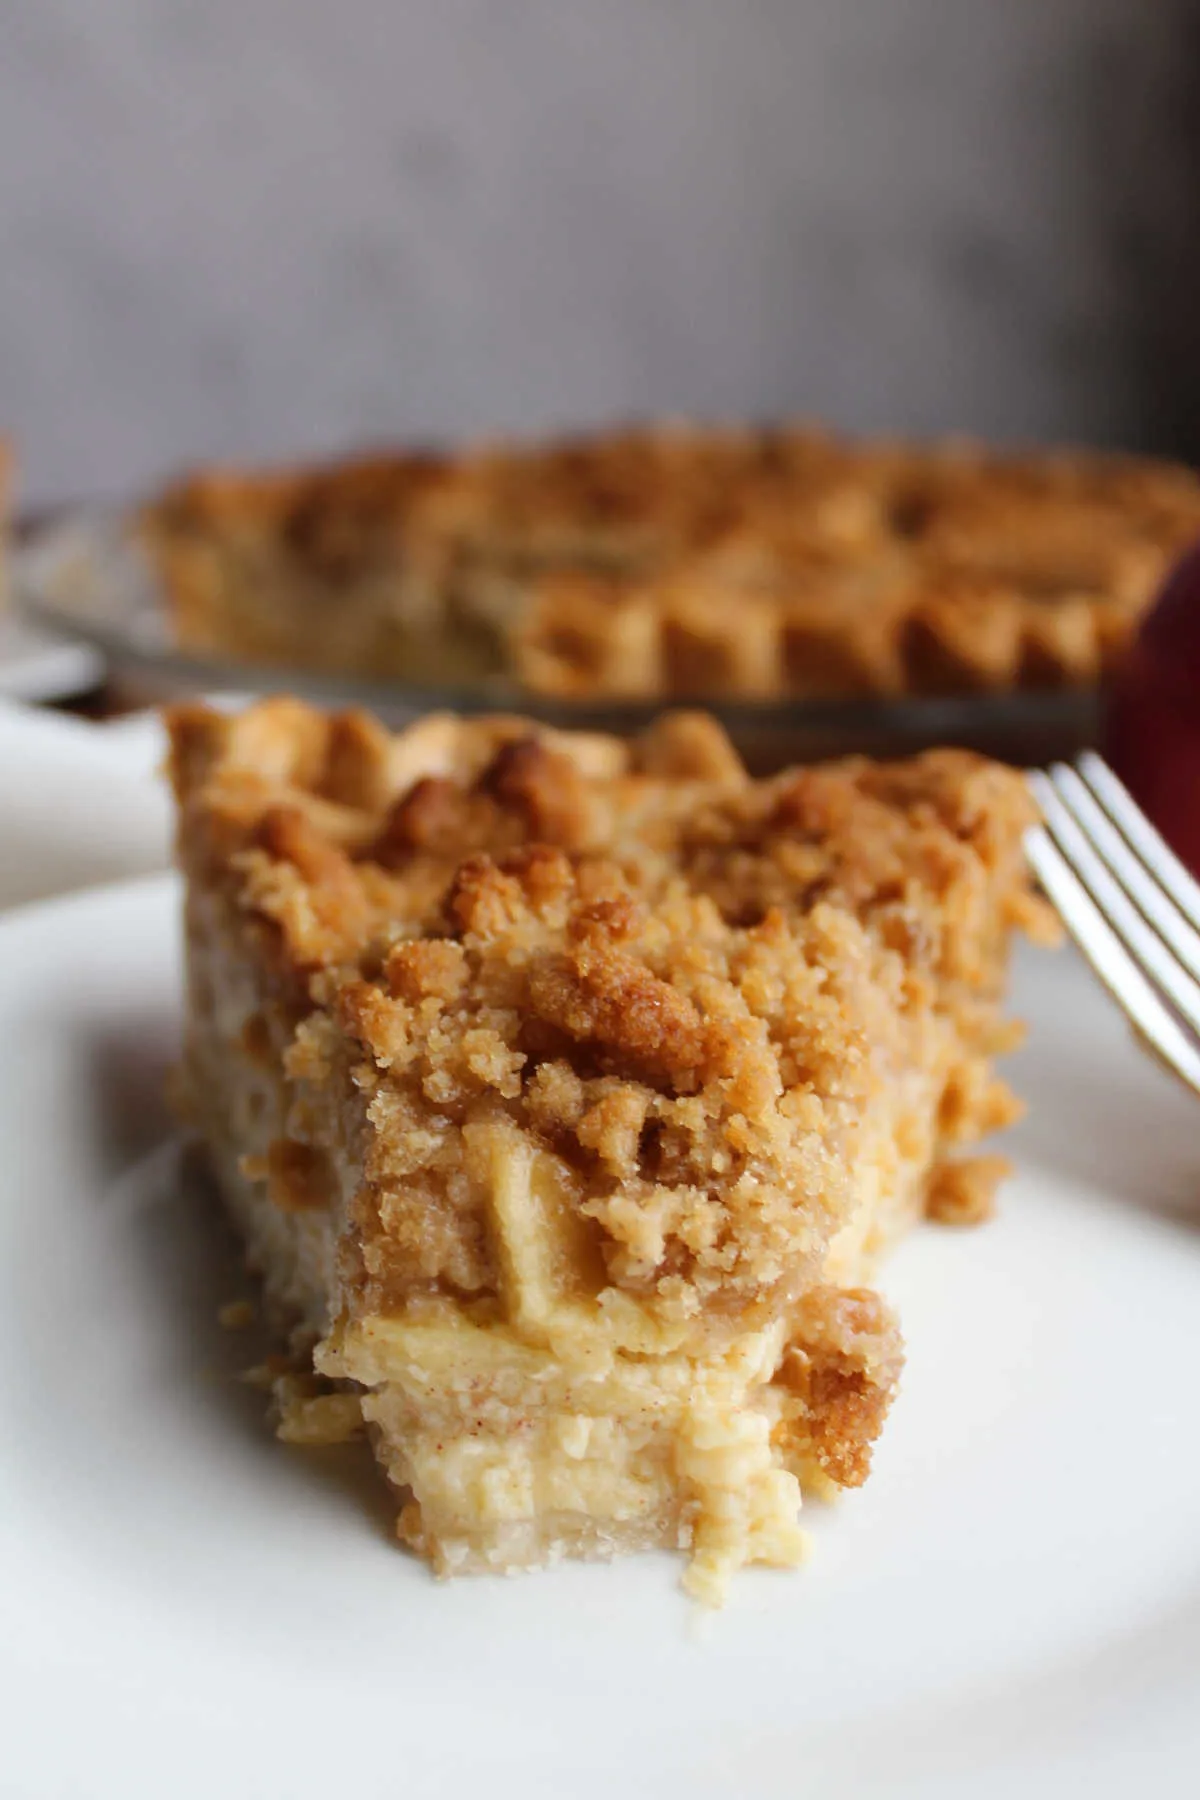 Slice of apple custard pie on plate with bite missing from tip showing creamy custard surrounding the apples and a golden streusel on top.